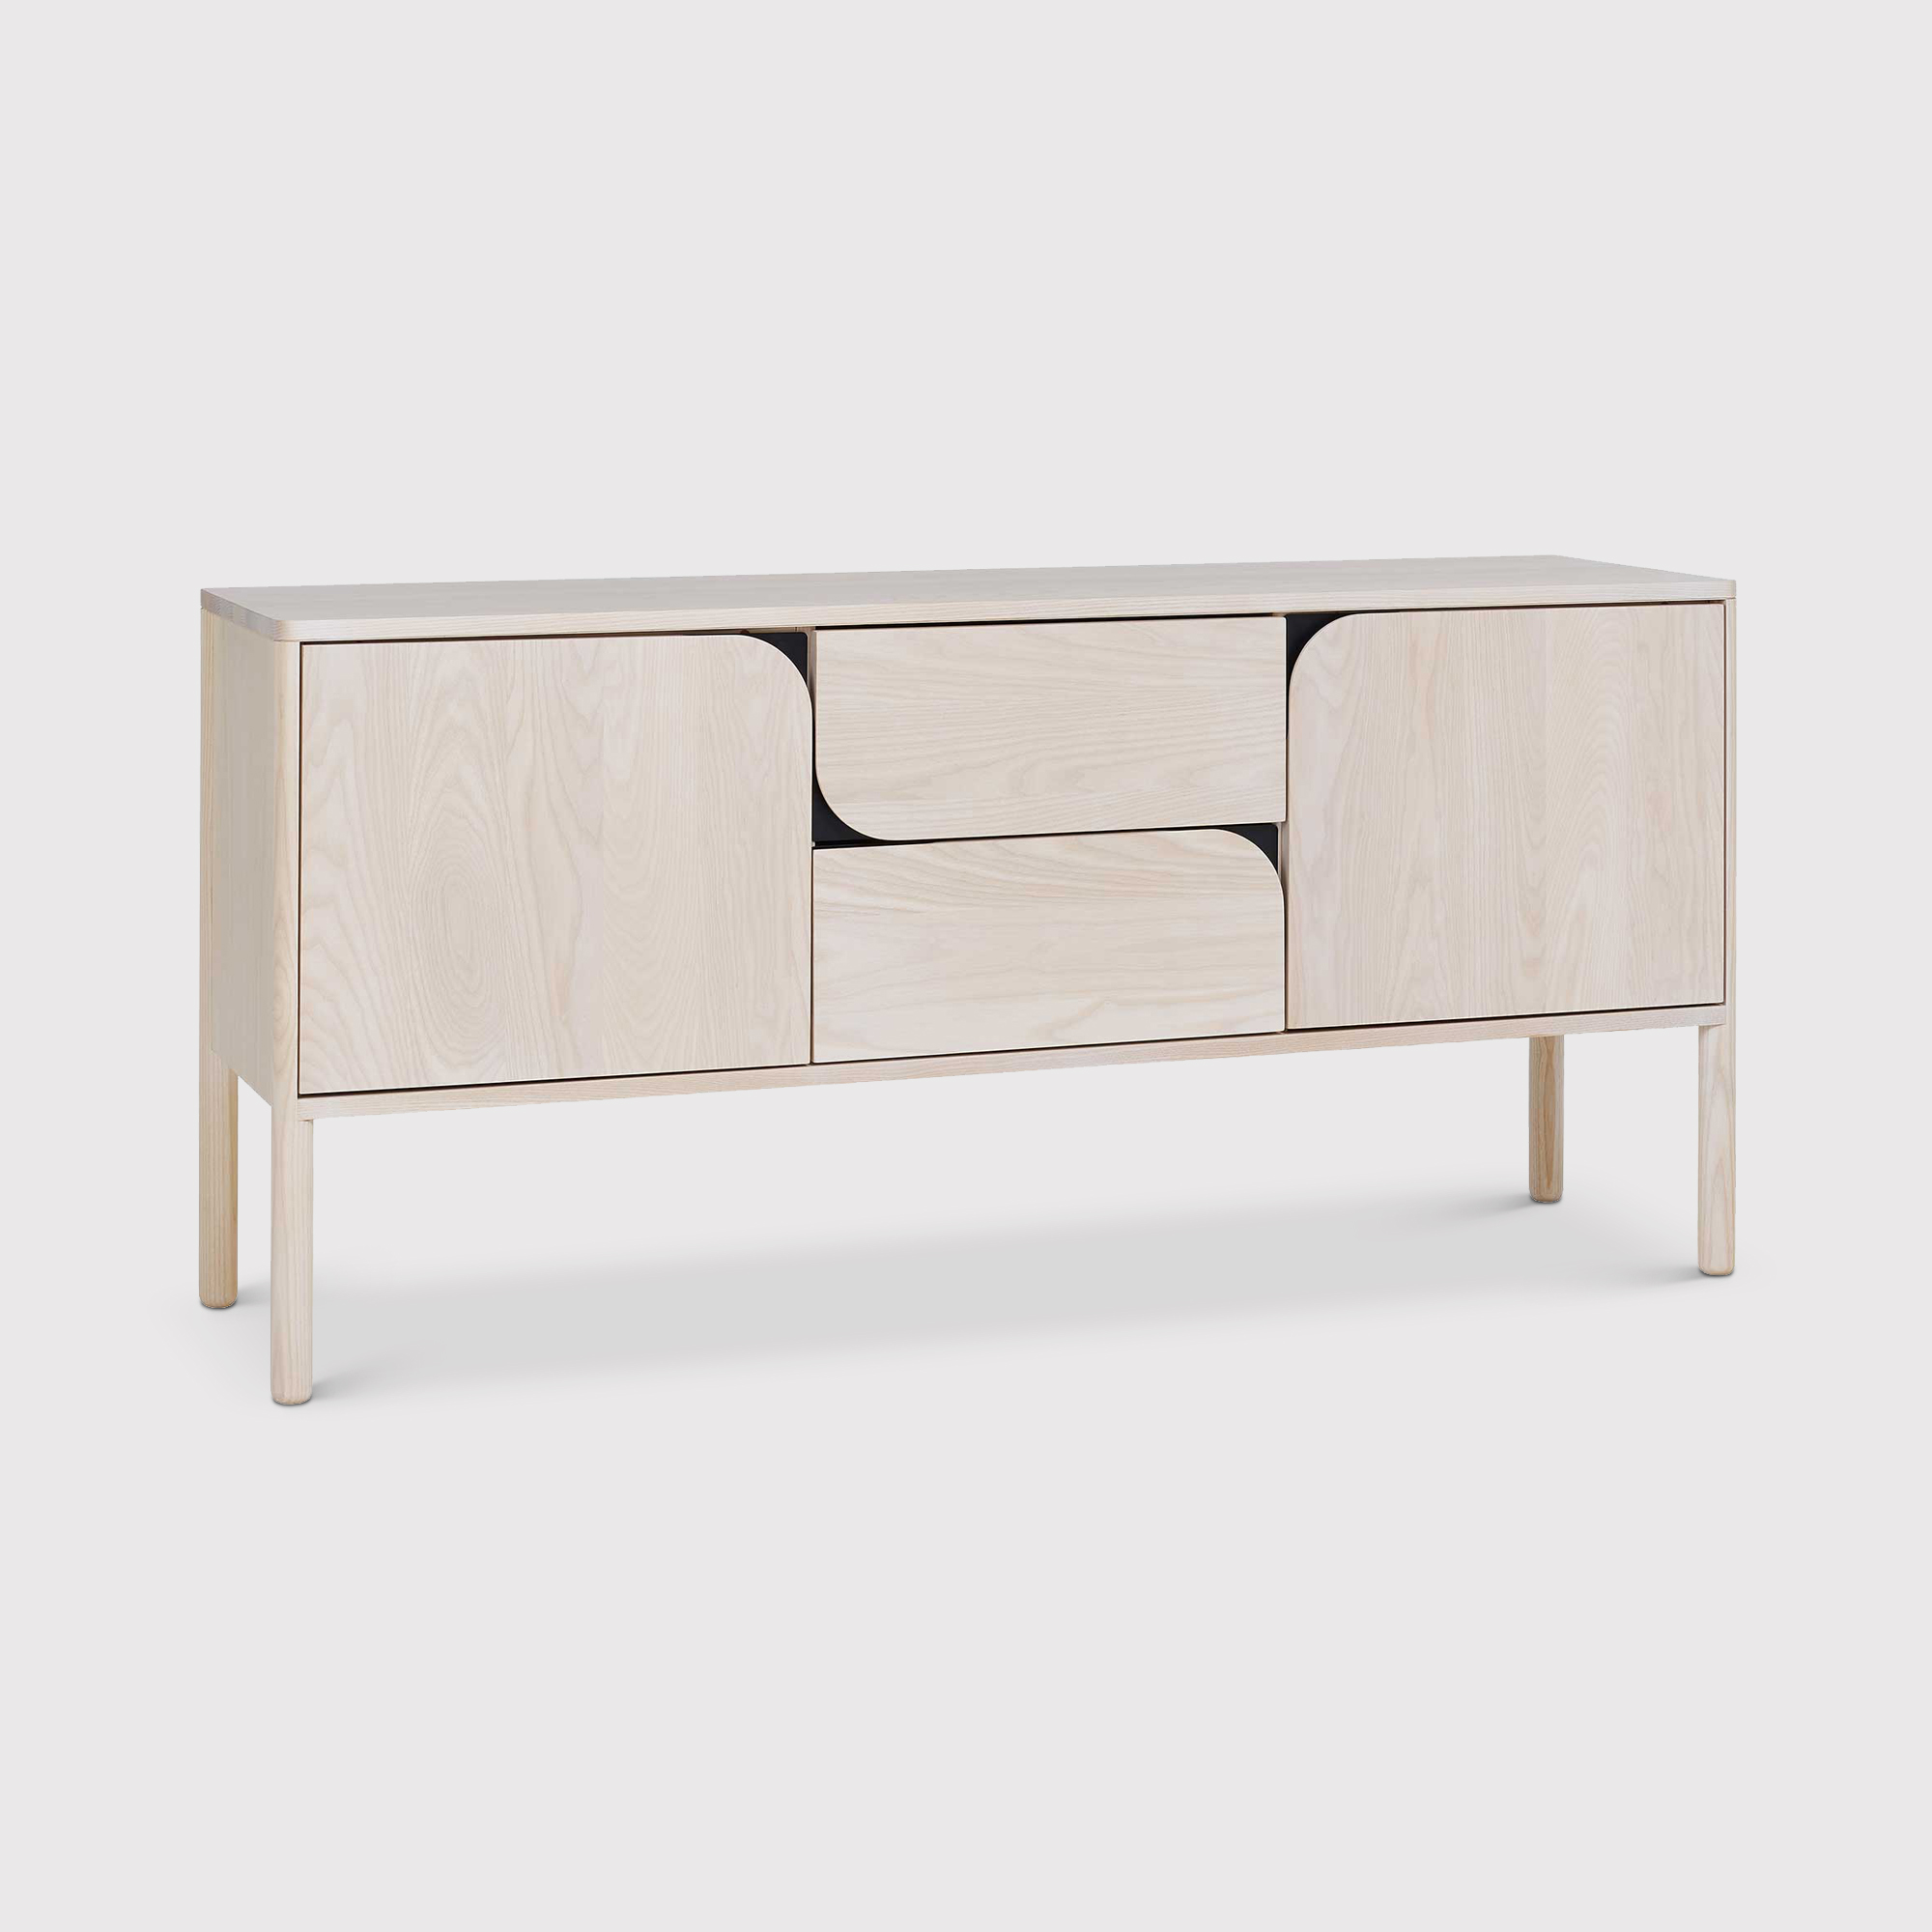 Ercol Verso Large Sideboard, Neutral | Barker & Stonehouse